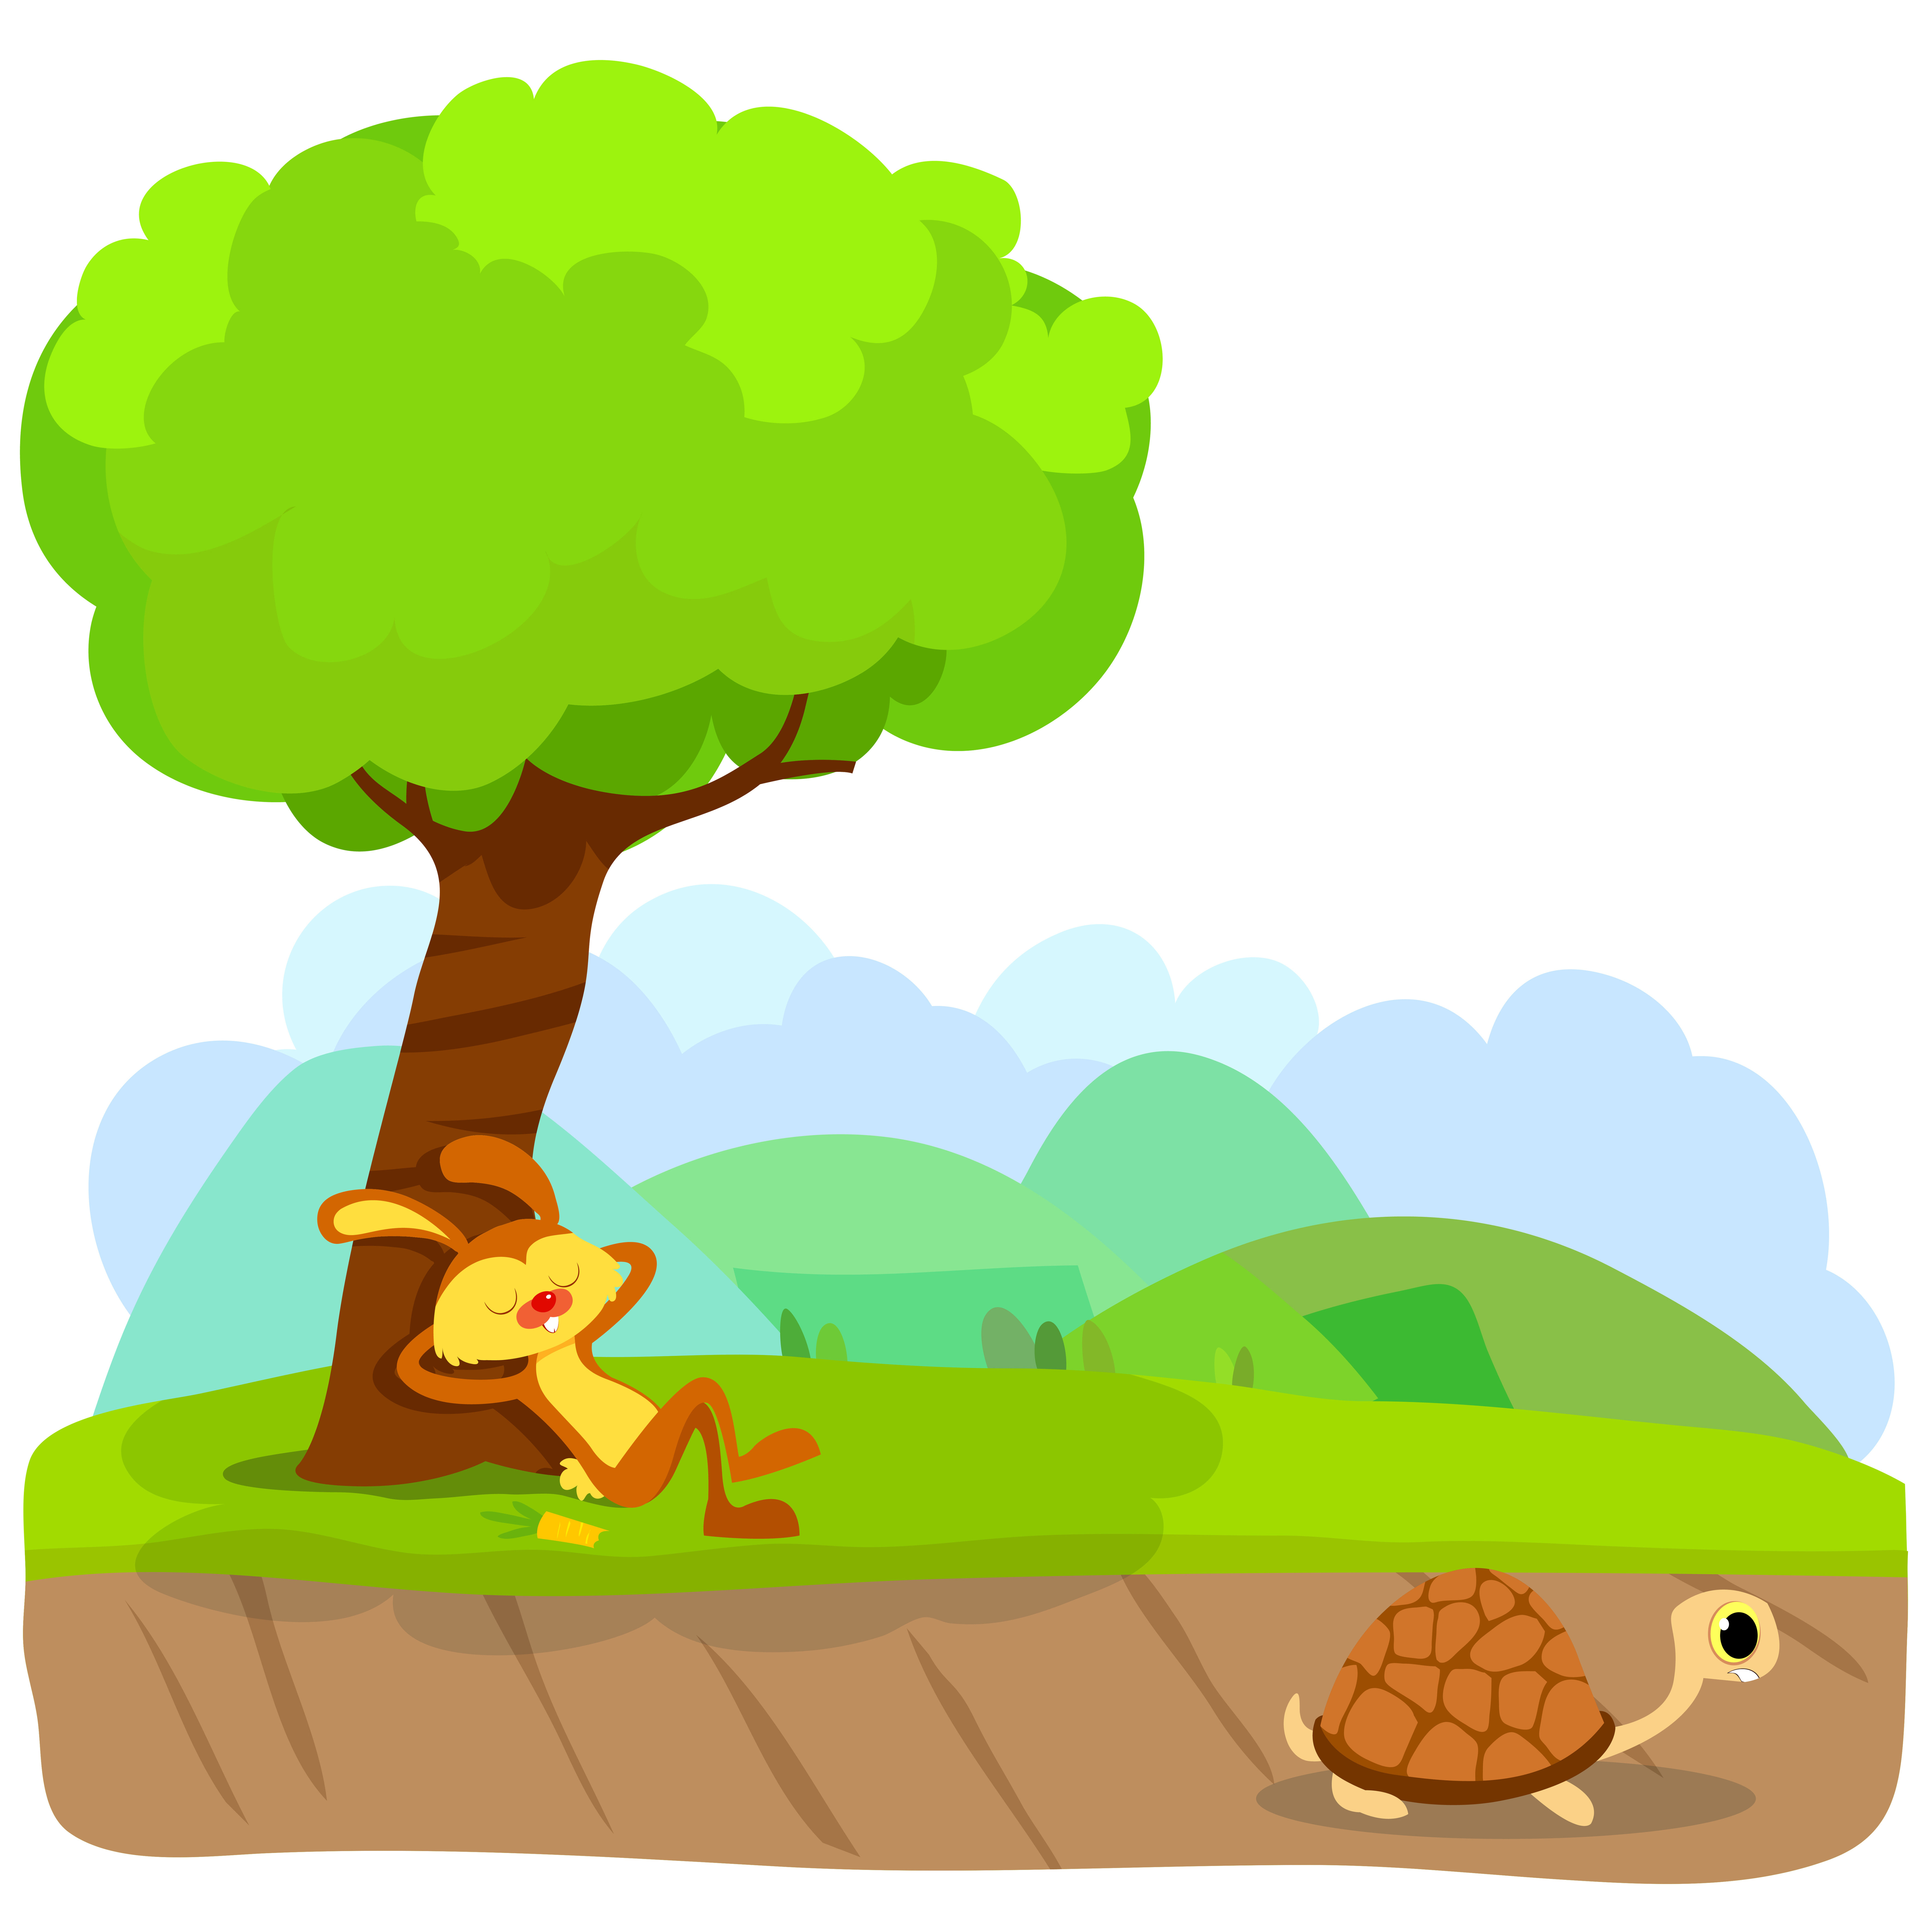 tortoise and hare clip art